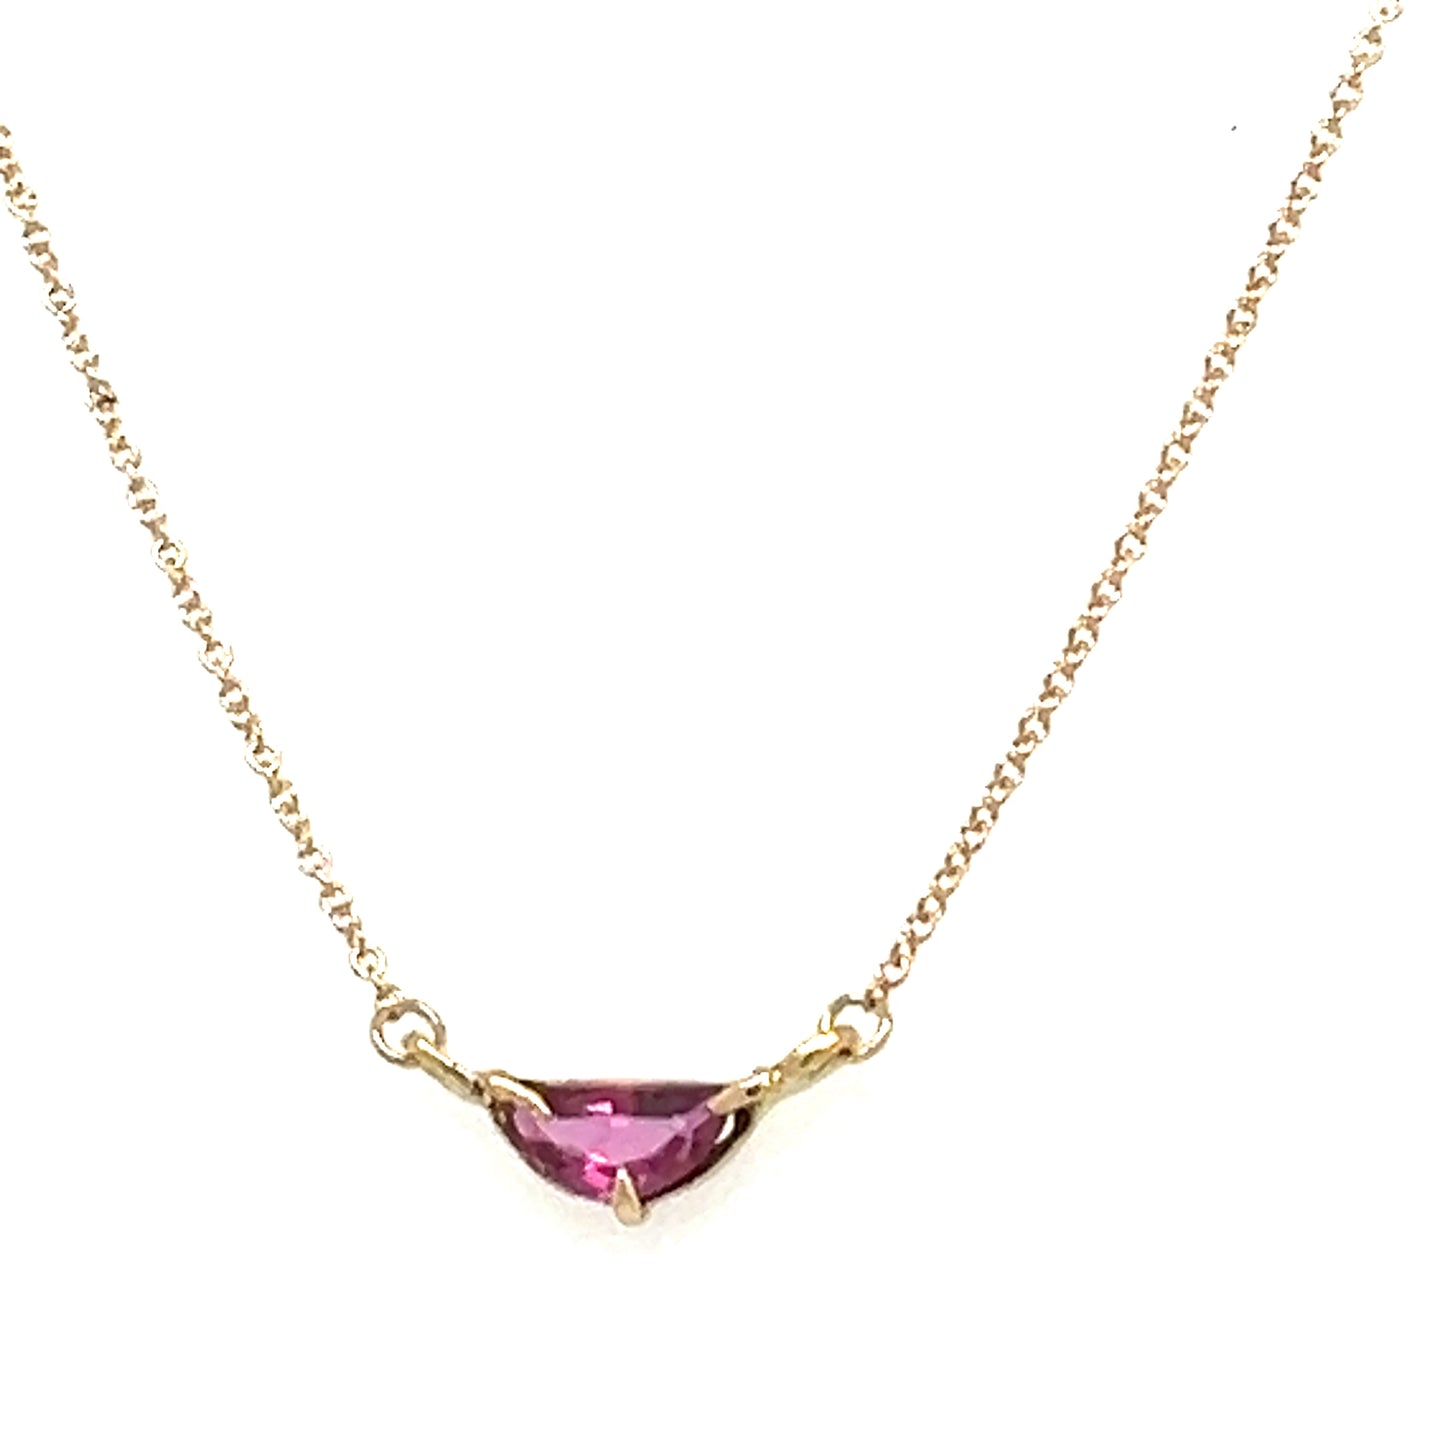 Sly Smile Necklace- Ruby & 14k Yellow Gold